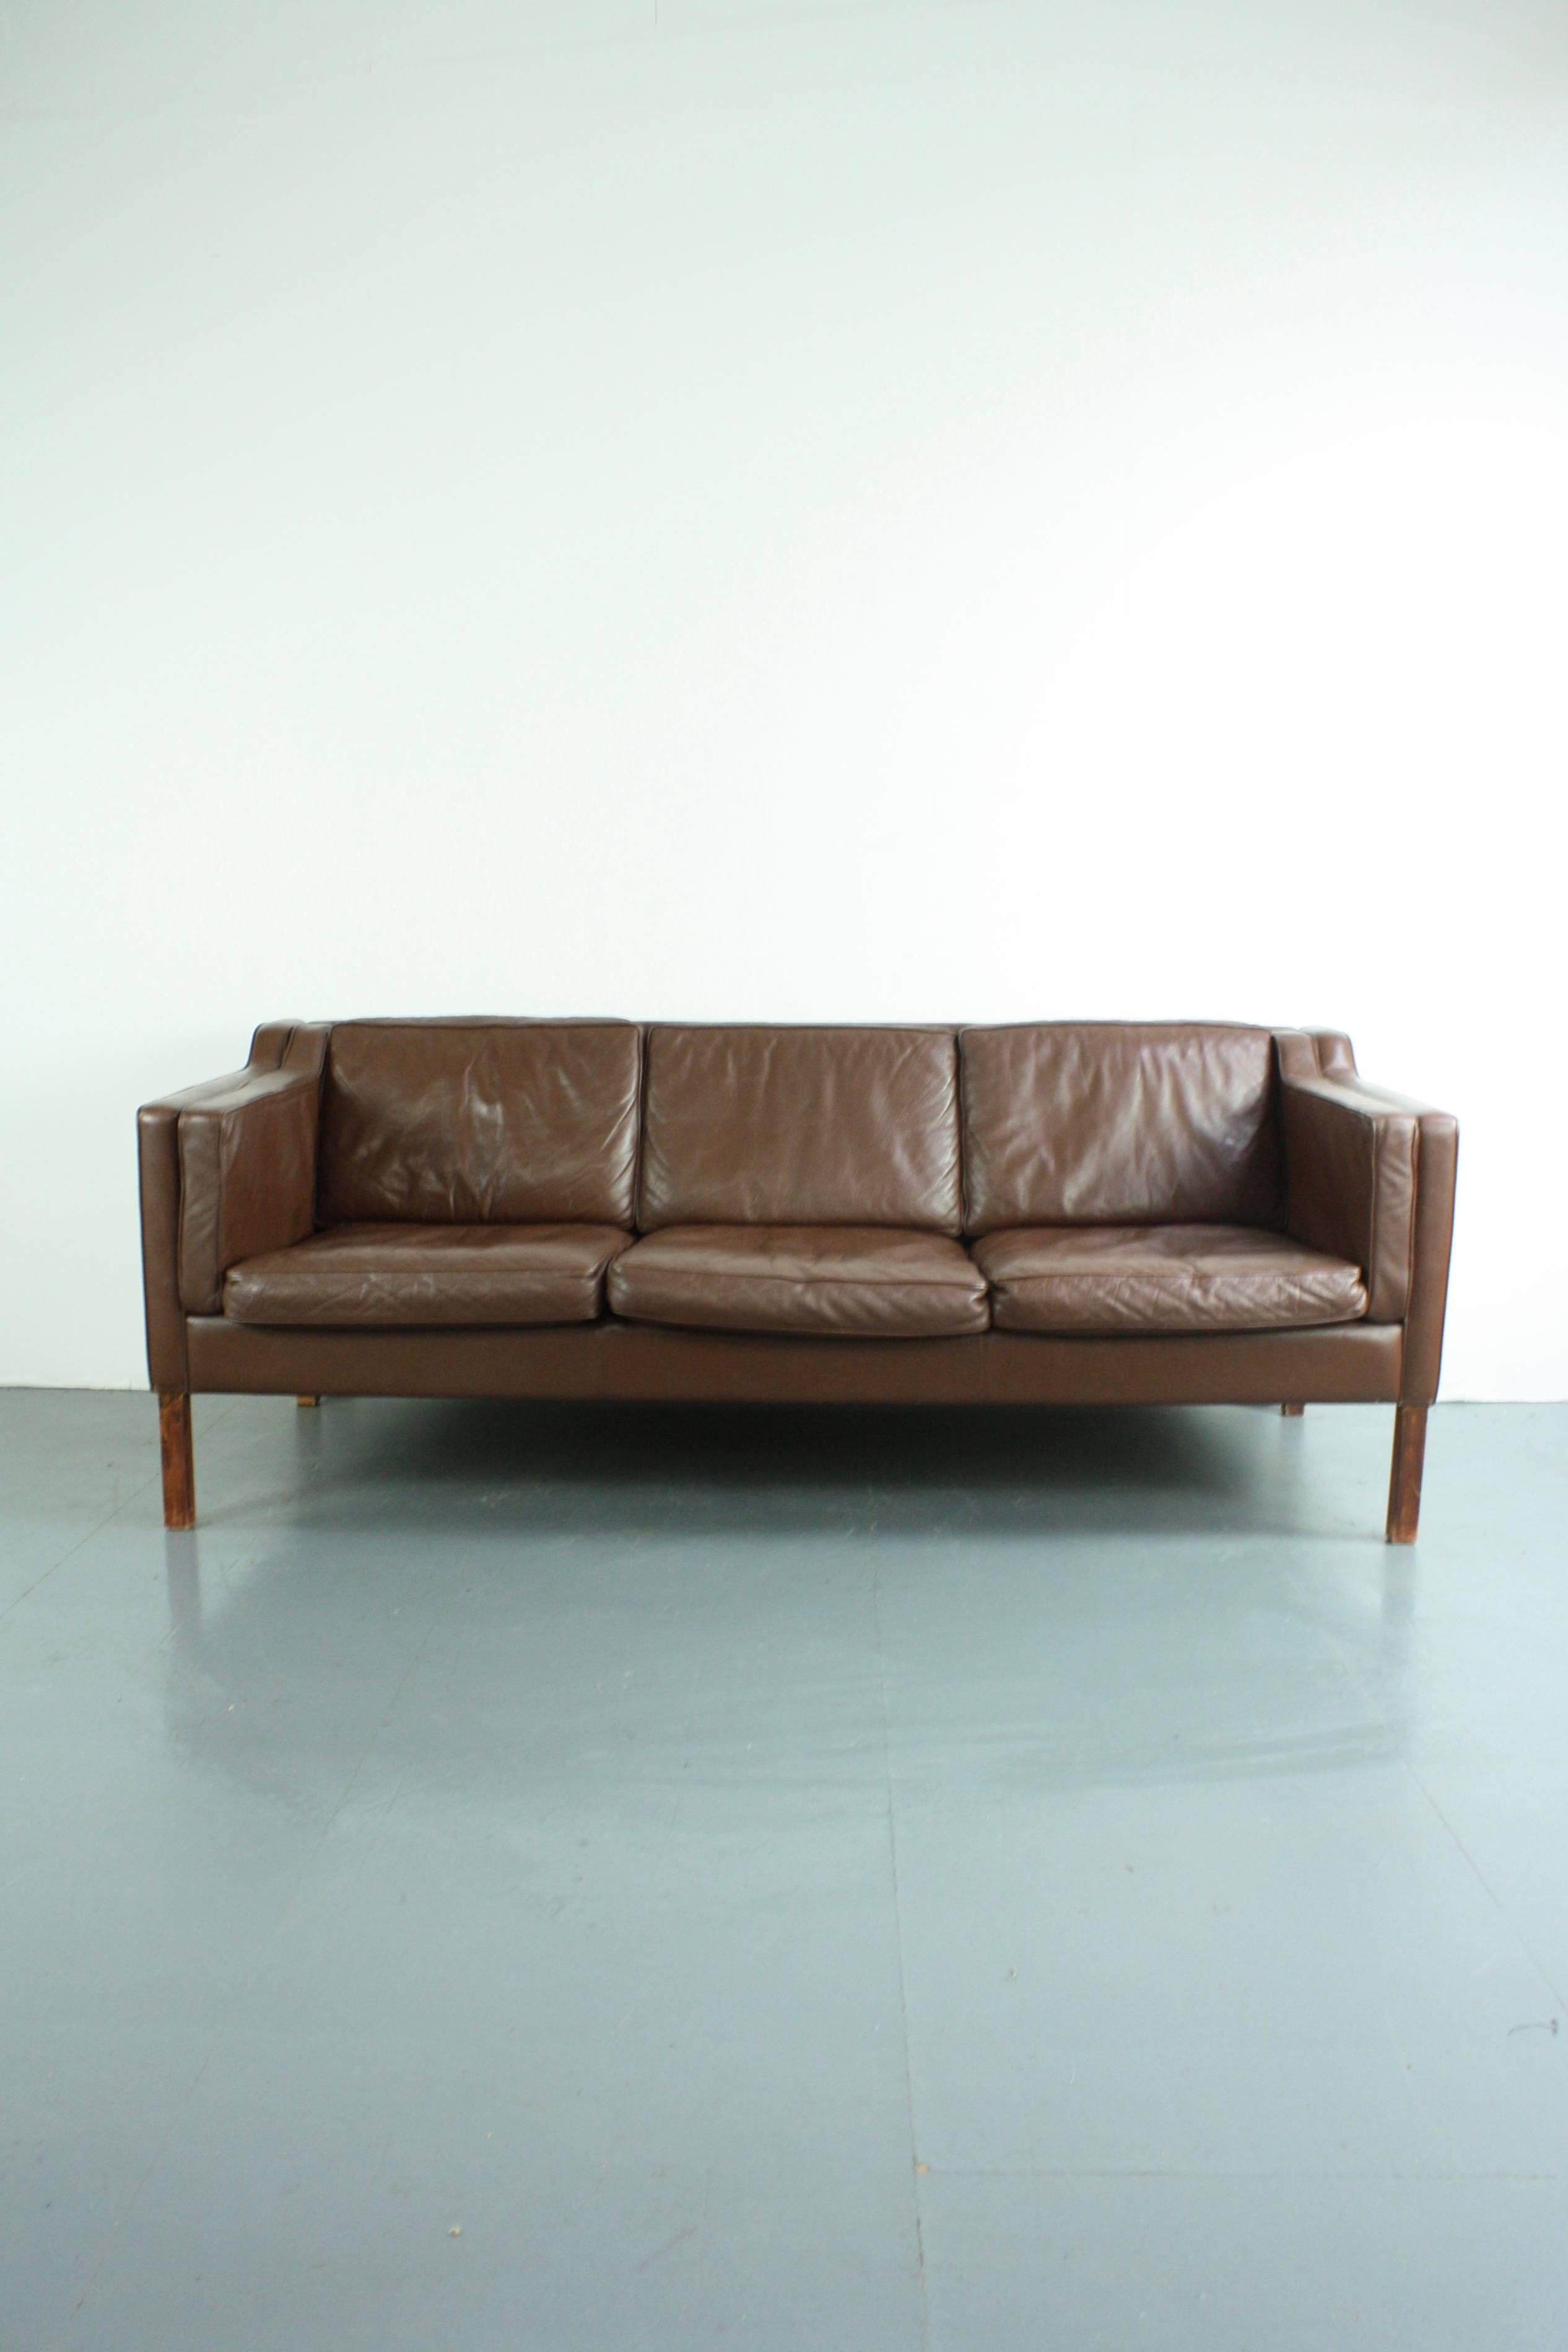 Dark Brown Leather Mogensen Style Vintage 1970s Three-Seat Danish Sofa In Good Condition For Sale In Lewes, East Sussex